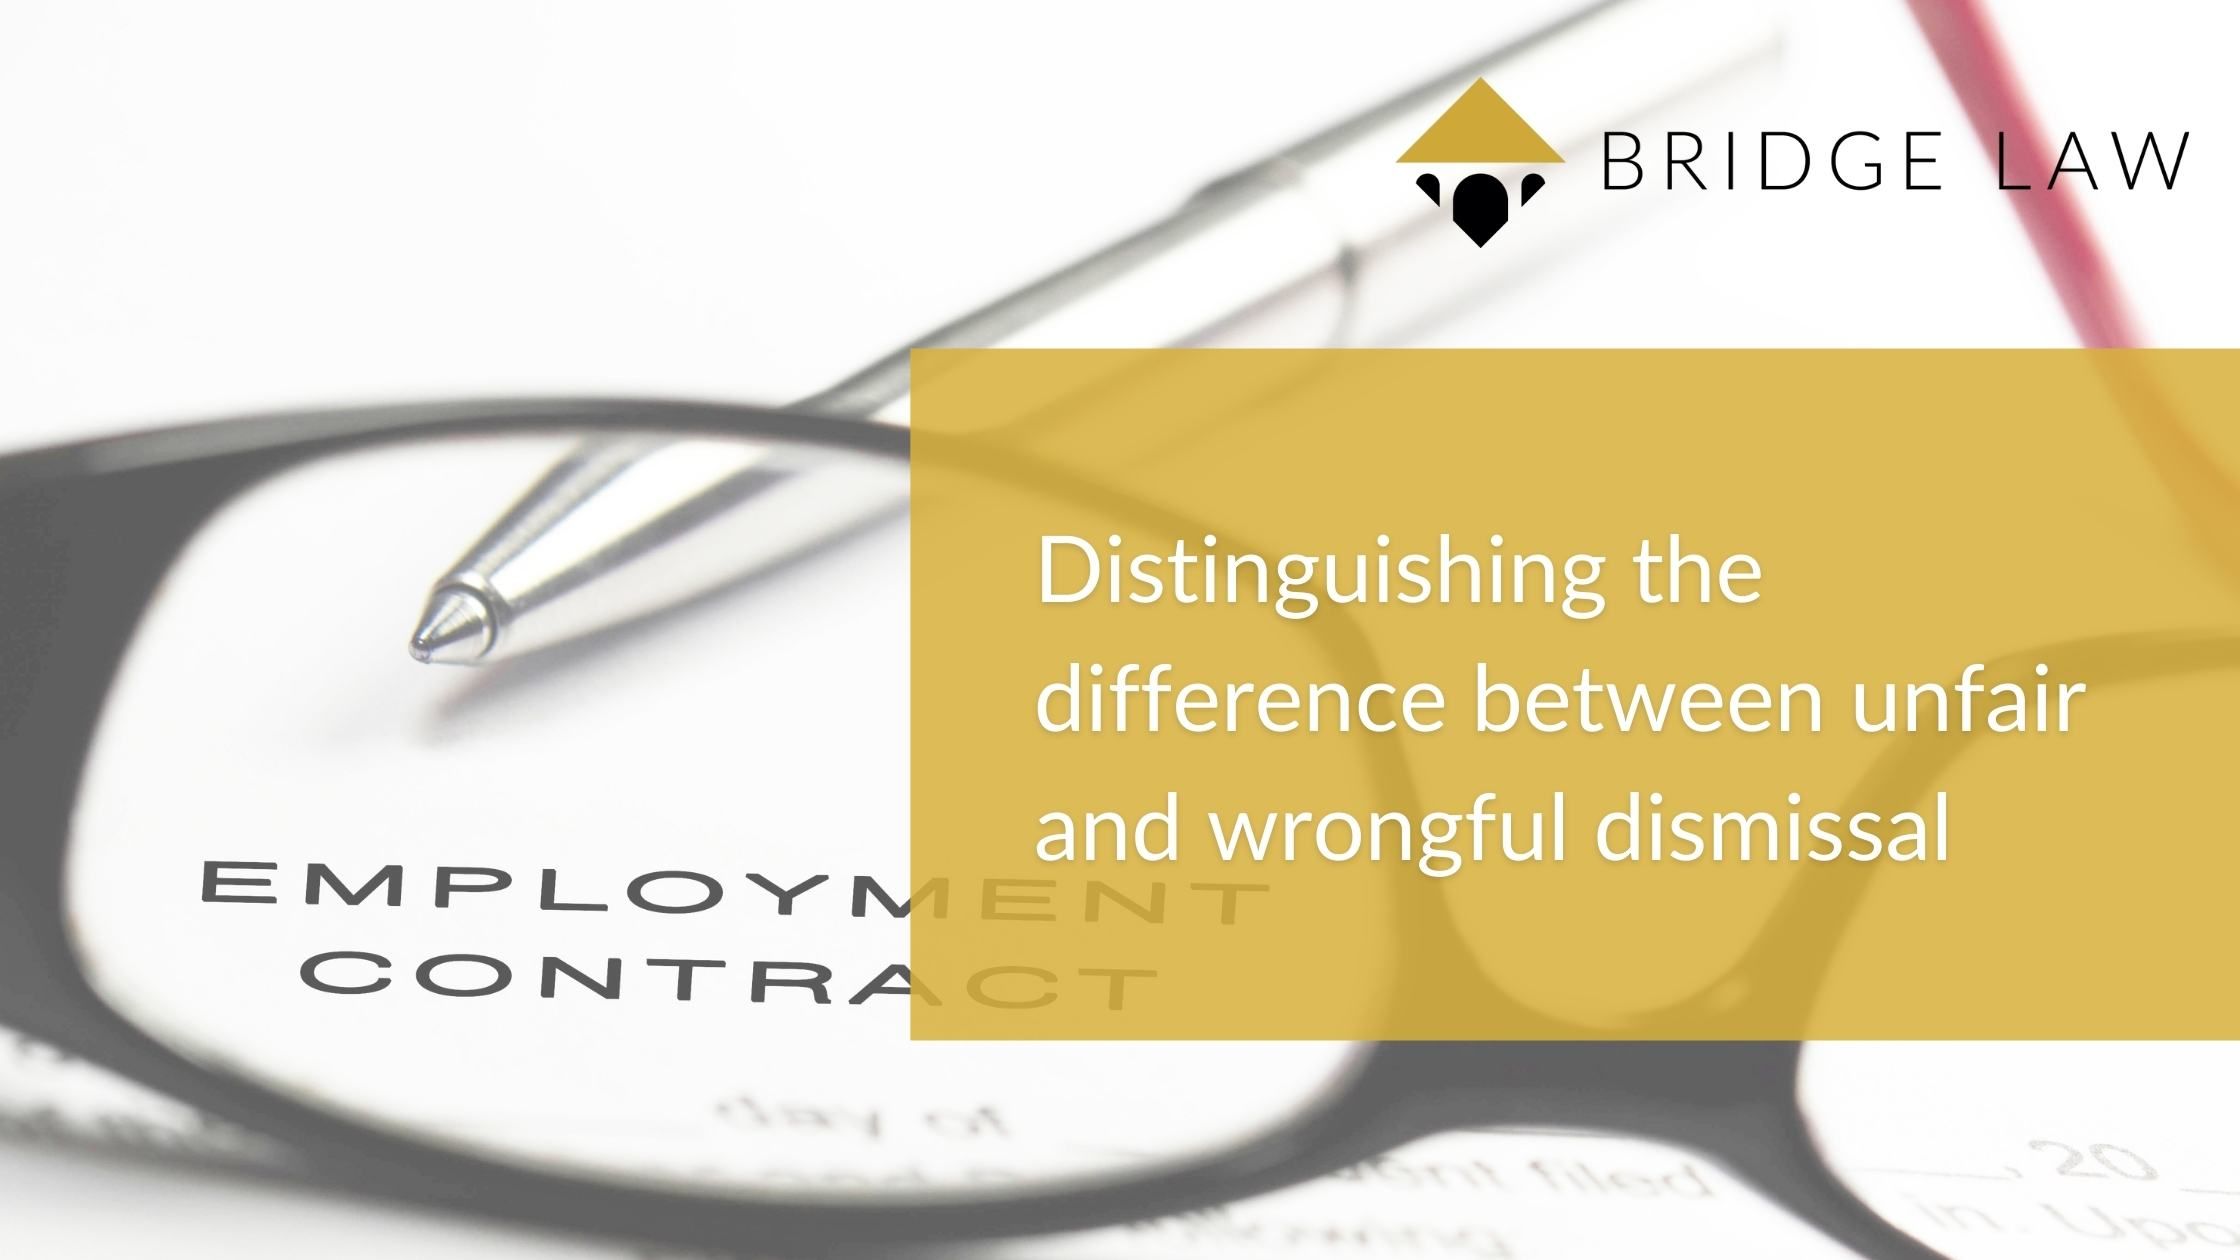 Bridge Law Blog banner with text: distinguishing the difference between unfair and wrongful dismissal